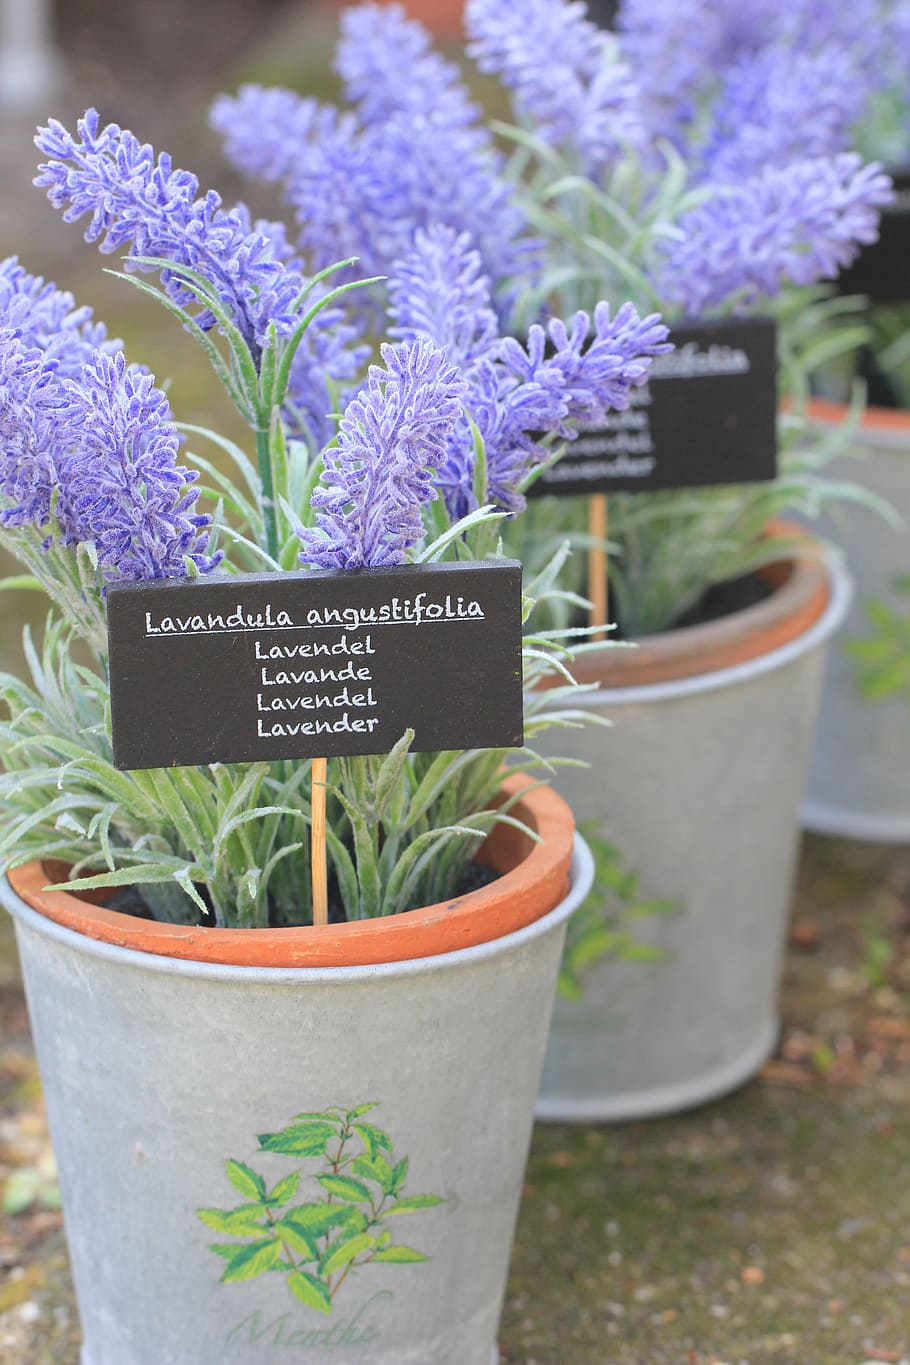 lavender, flower, herb, natural, plant, purple, floral, nature, herbal, aromatherapy